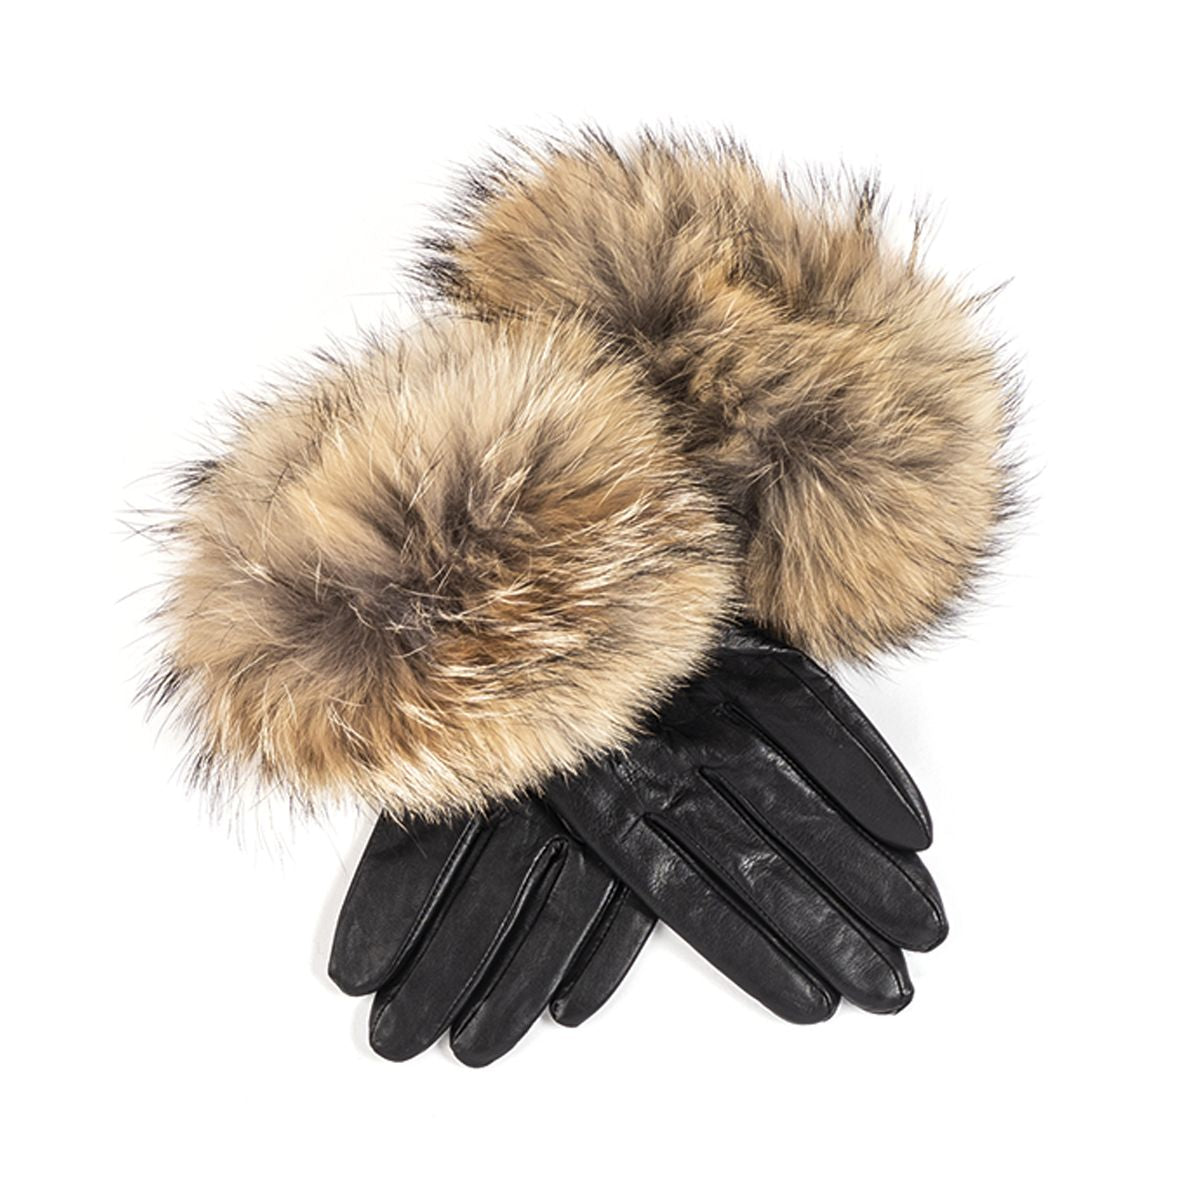 LEATHER GLOVES WITH UPCYCLED FUR GOLF  2124 BLACK-CAMEL L  